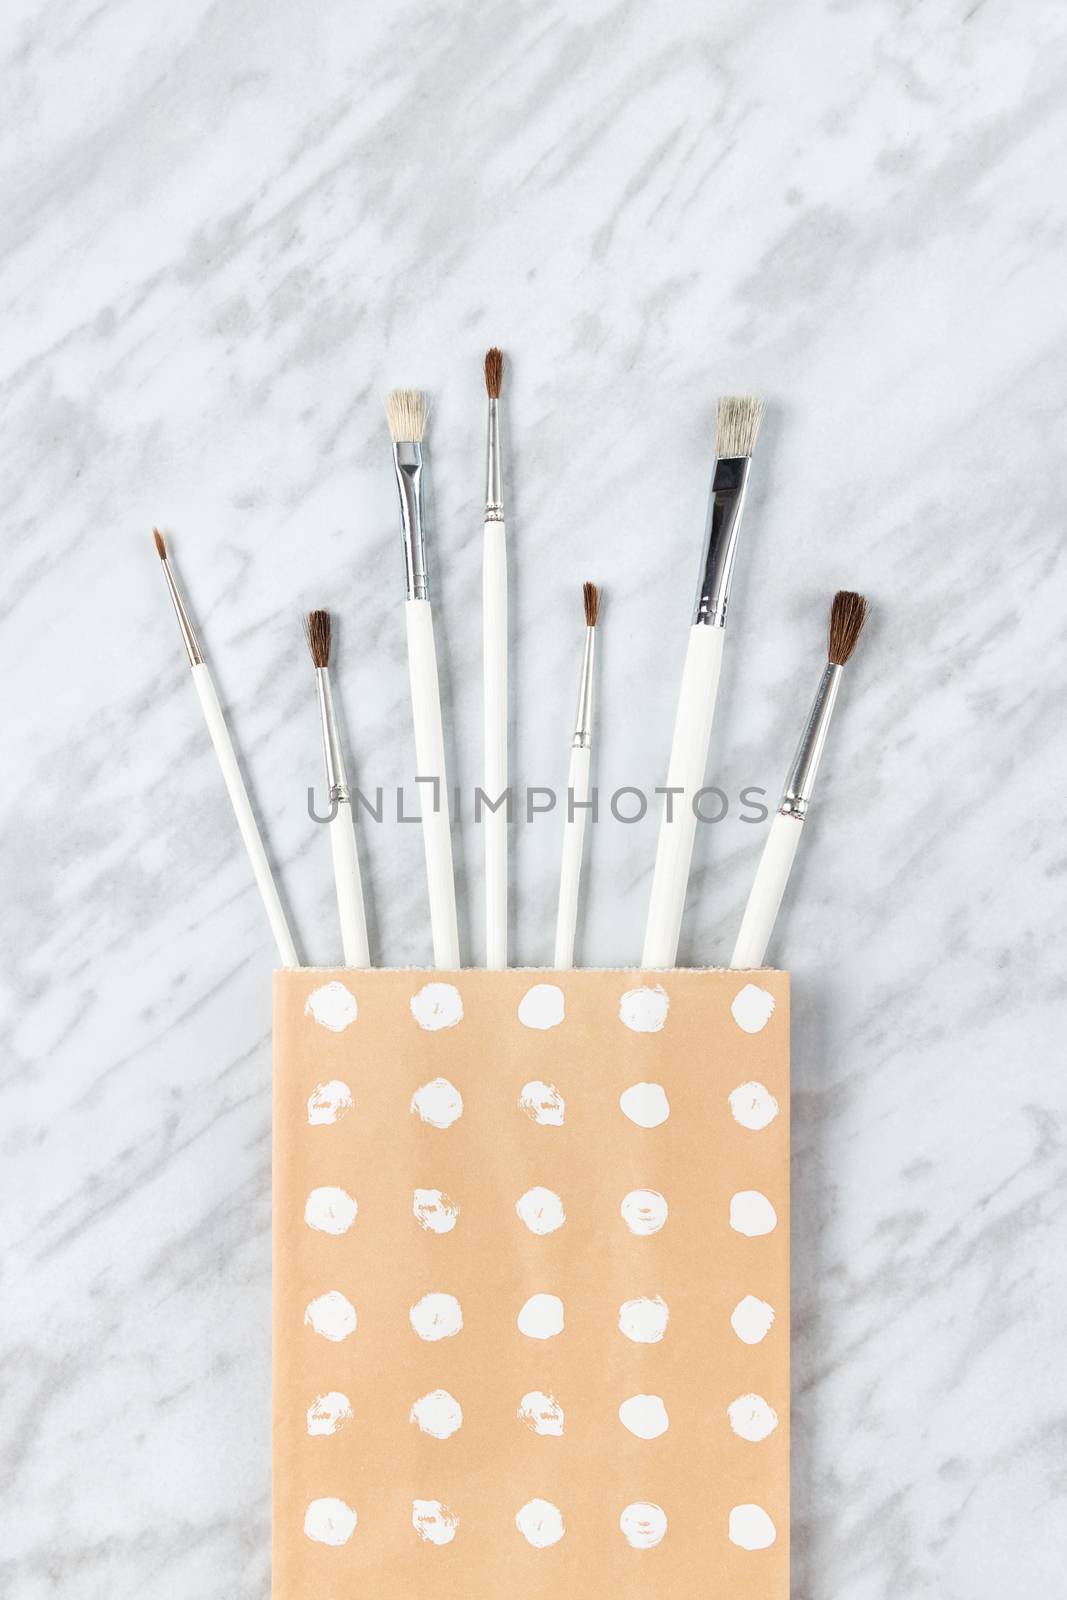 White paint brushes in a decorative paper bag by anikasalsera